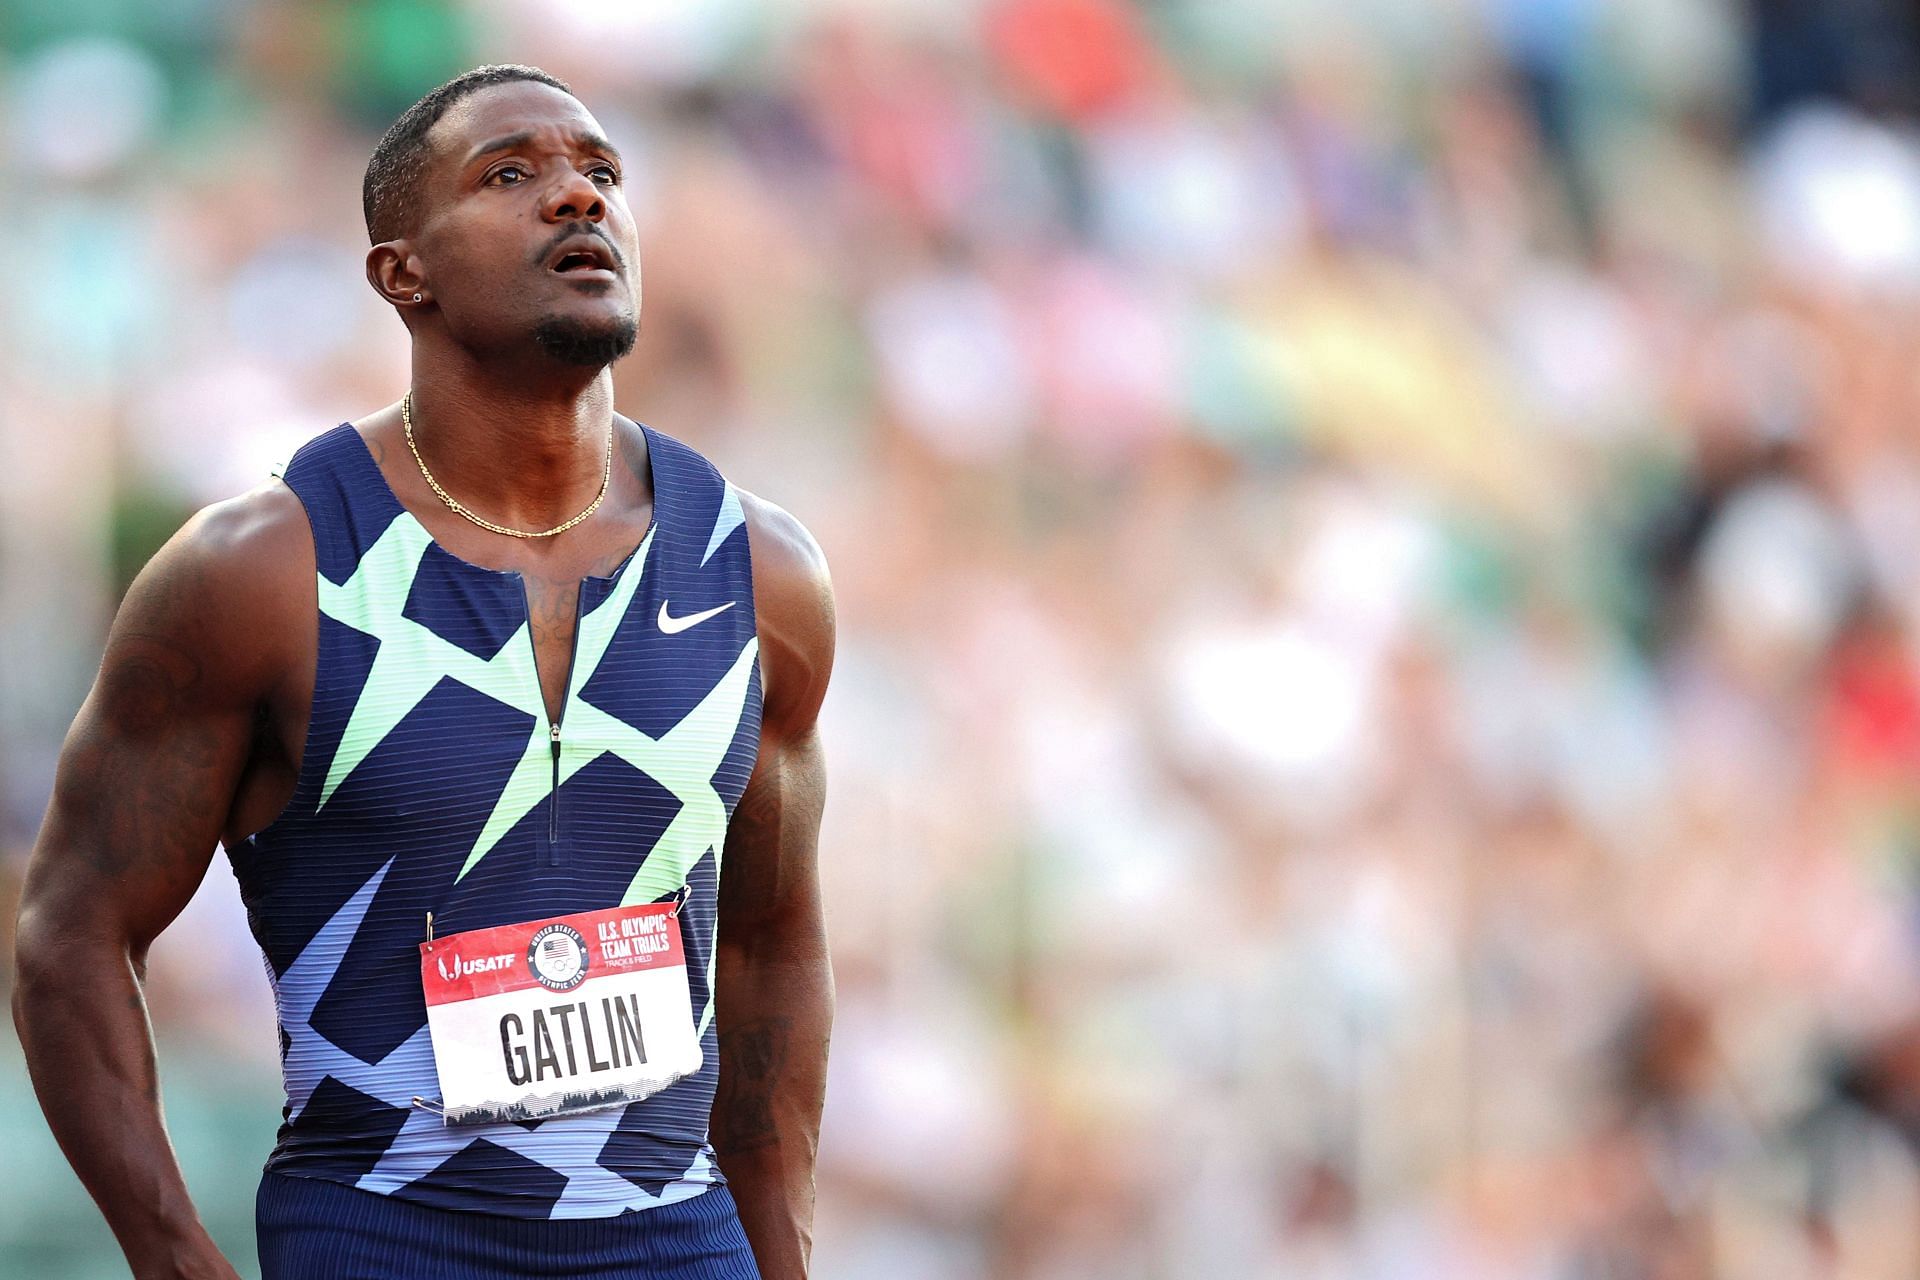 Justin Gatlin at the Track and Field Trails for the 2020 Olympics